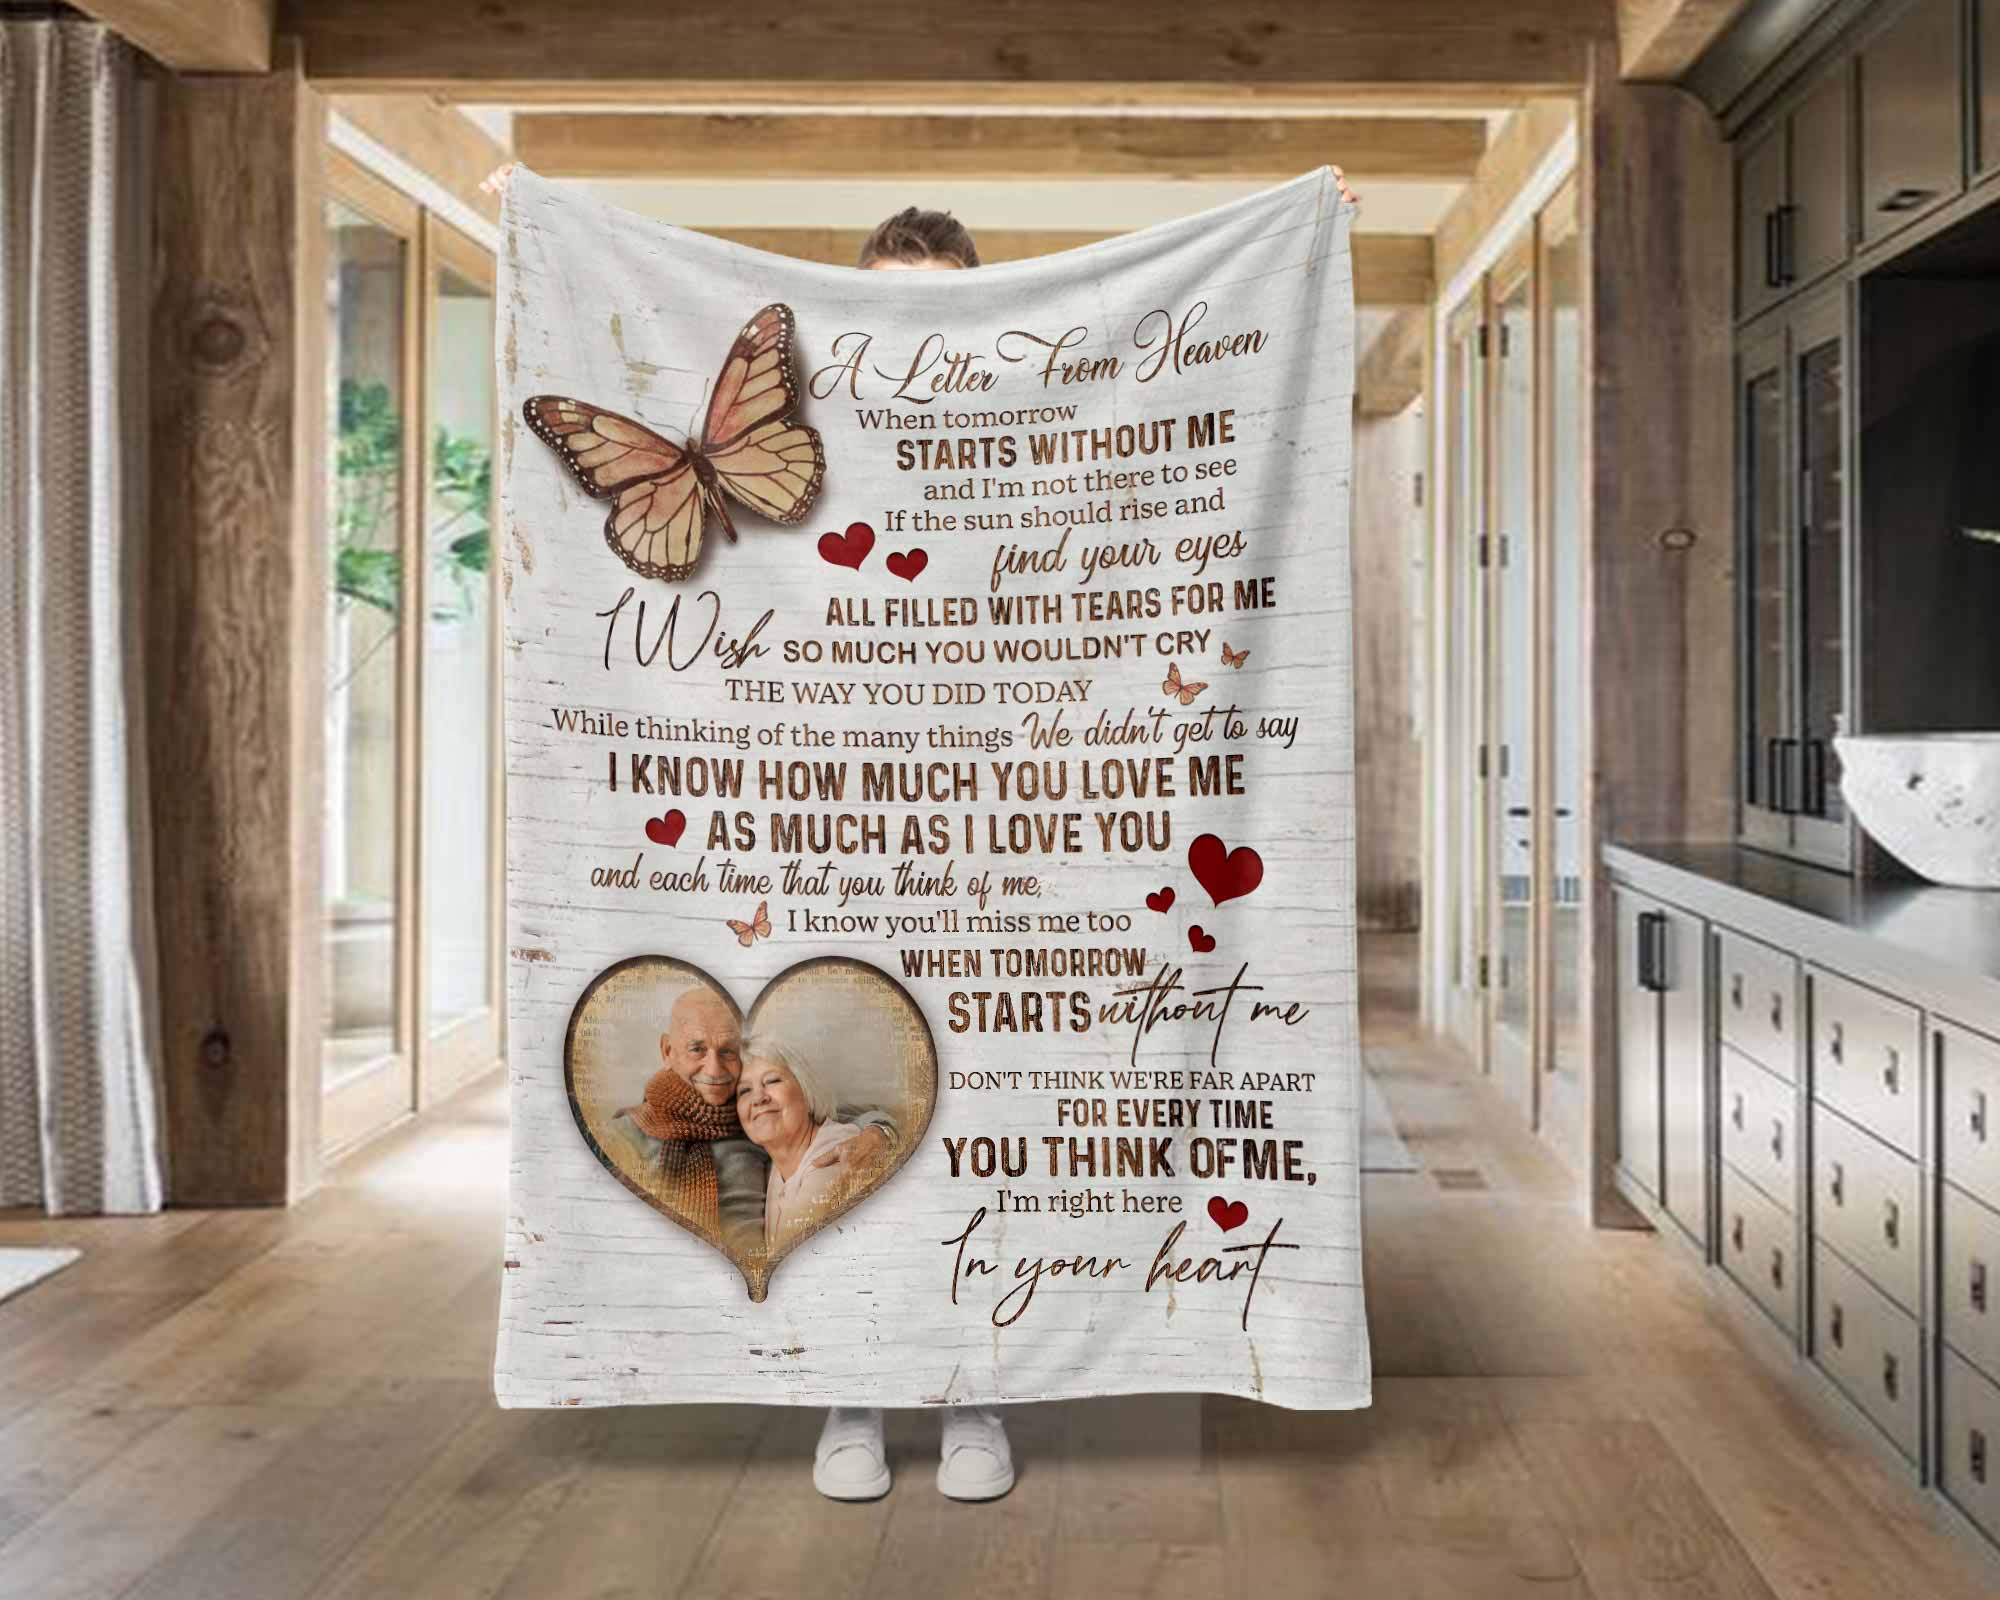 Personalized Memorial Blankets For Loss Of Father, Bereavement Poem A Letter From Heaven